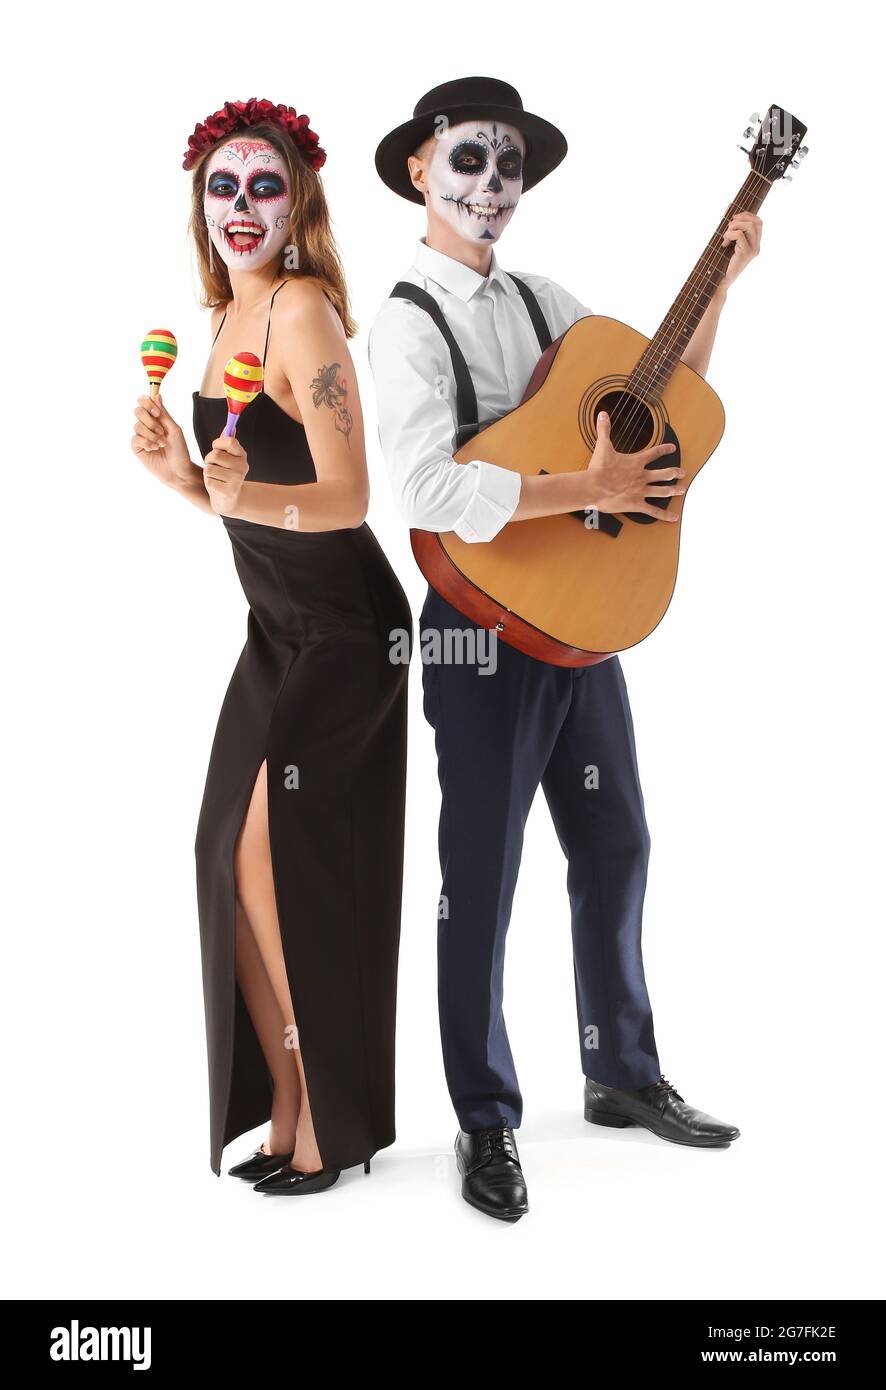 Young couple with painted skull on faces, maracas and guitar against white background. Celebration of Mexico's Day of the Dead (El Dia de Muertos) Stock Photo